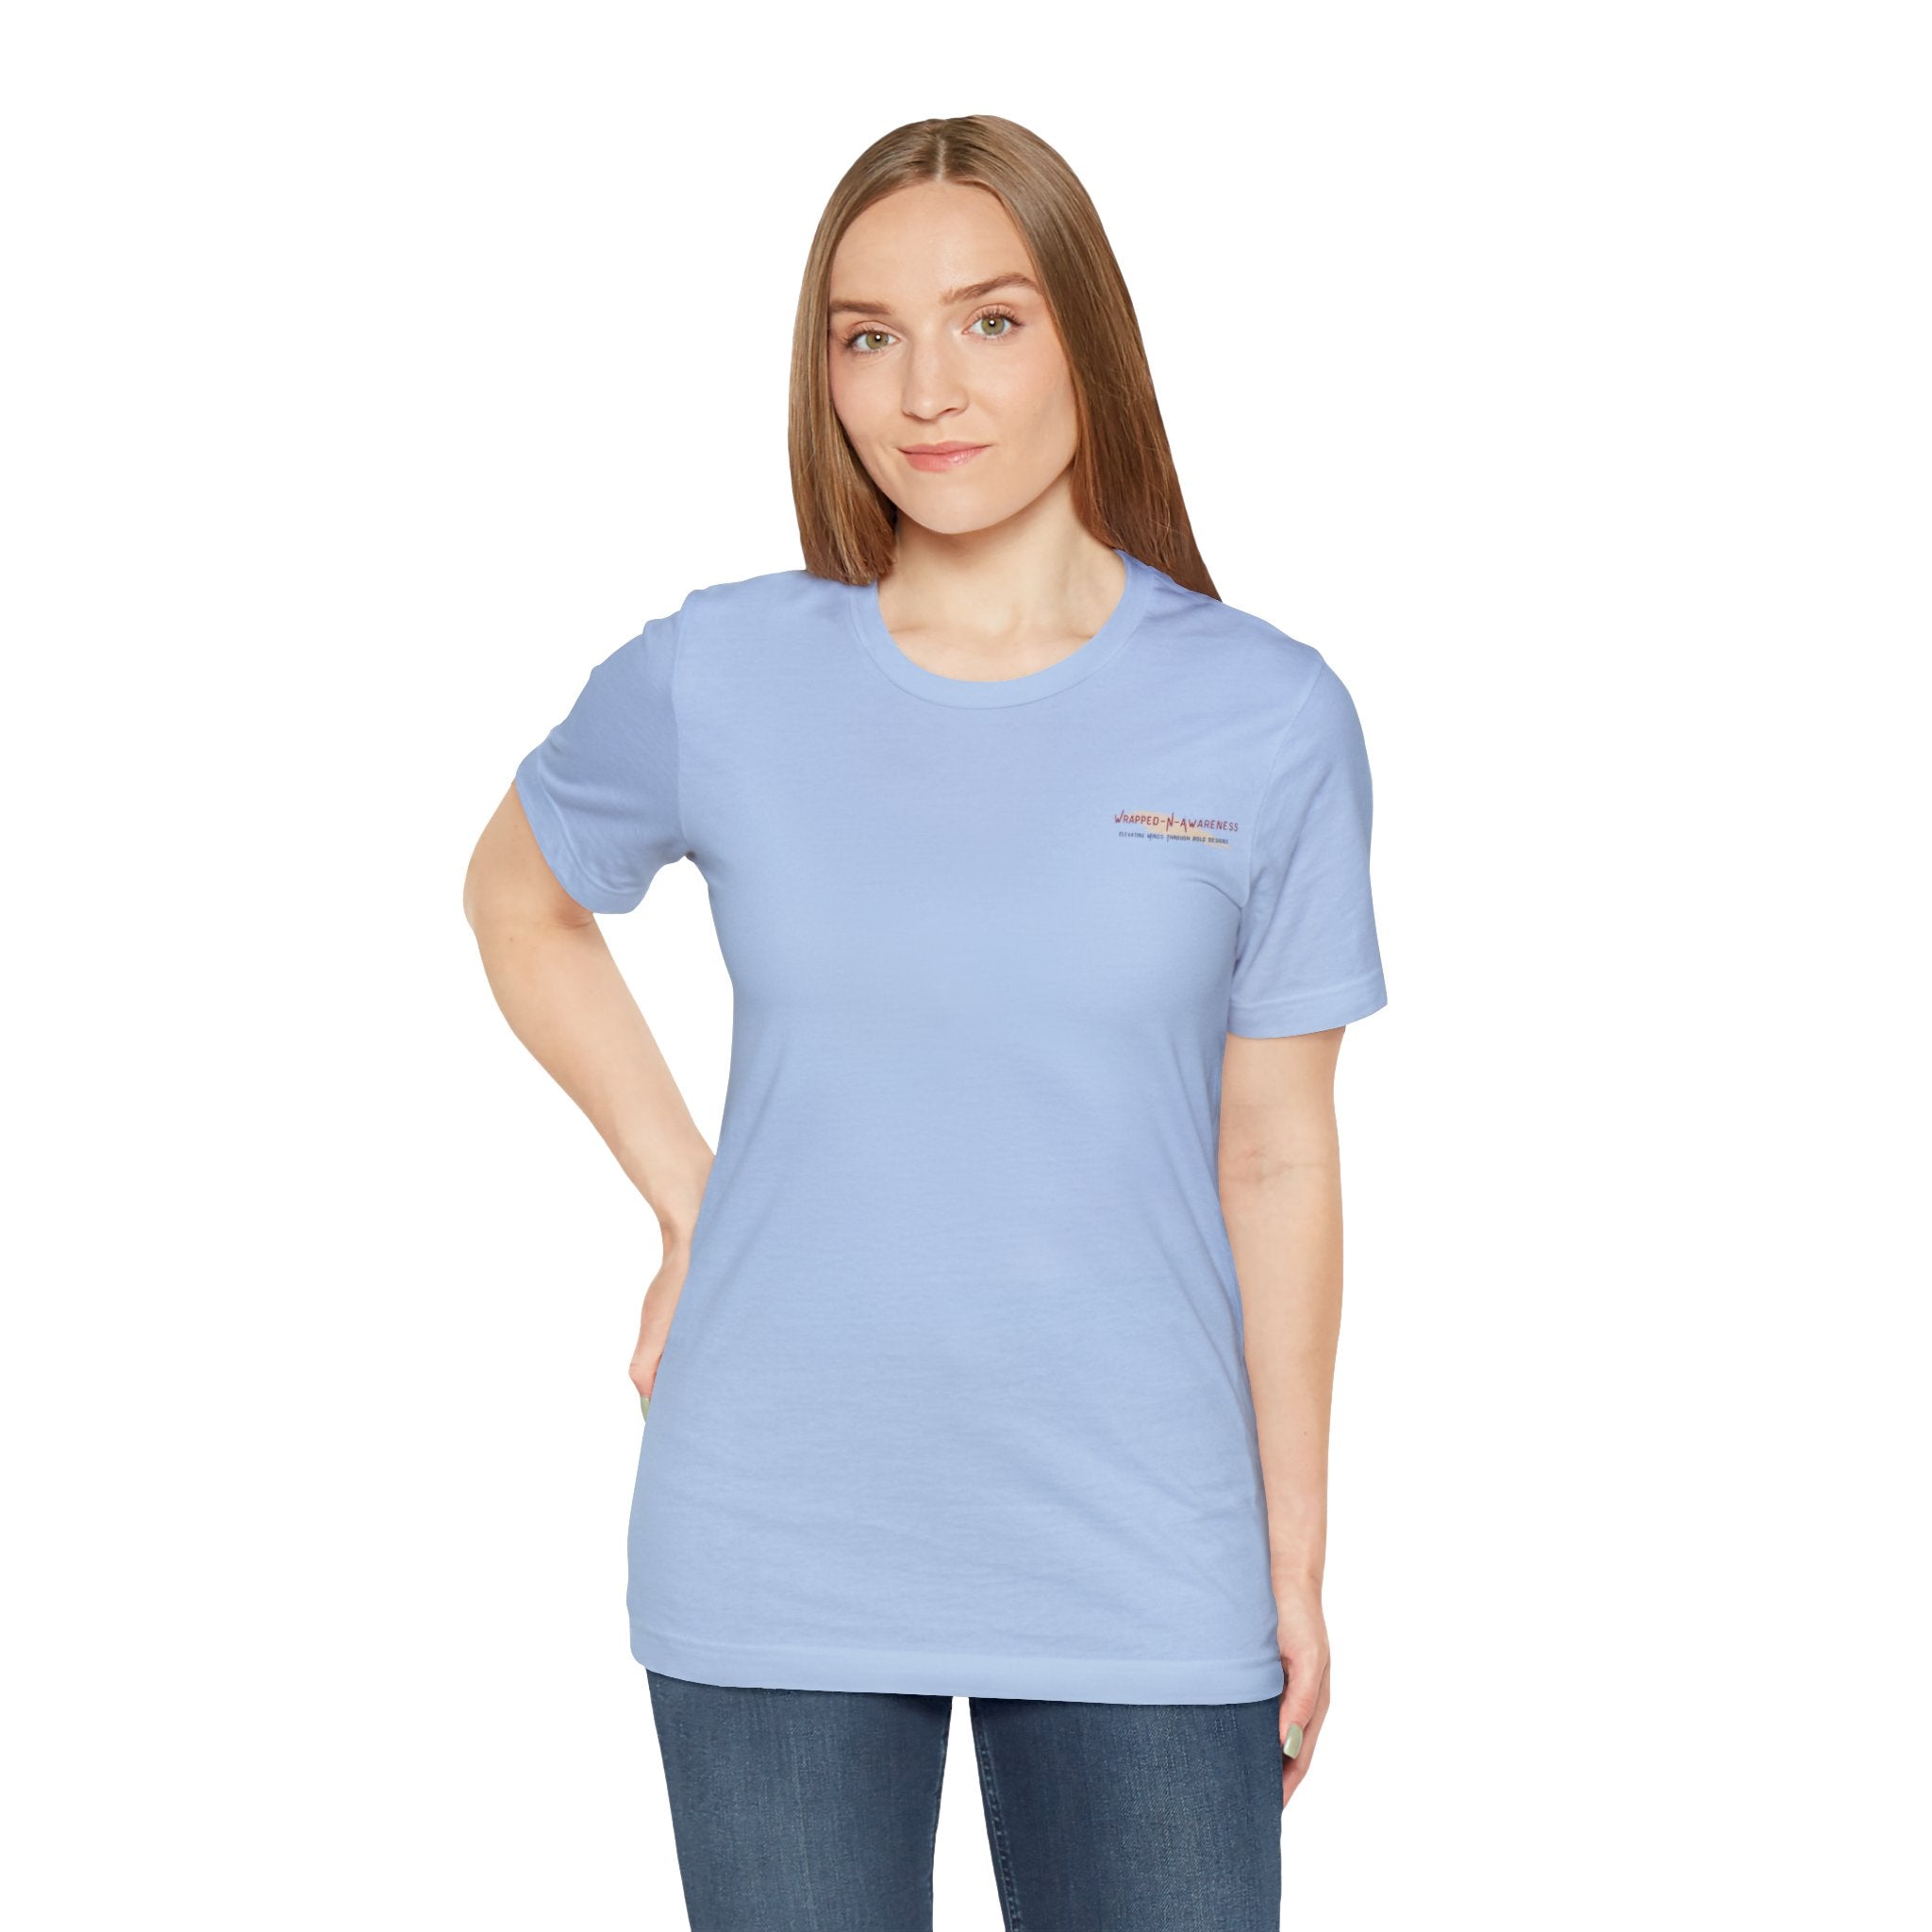 Mindfulness Heals Wounds Tee - Bella+Canvas 3001 Turquoise Airlume Cotton Bella+Canvas 3001 Crew Neckline Jersey Short Sleeve Lightweight Fabric Mental Health Support Retail Fit Tear-away Label Tee Unisex Tee T-Shirt 11041362378117029145_2048 Printify